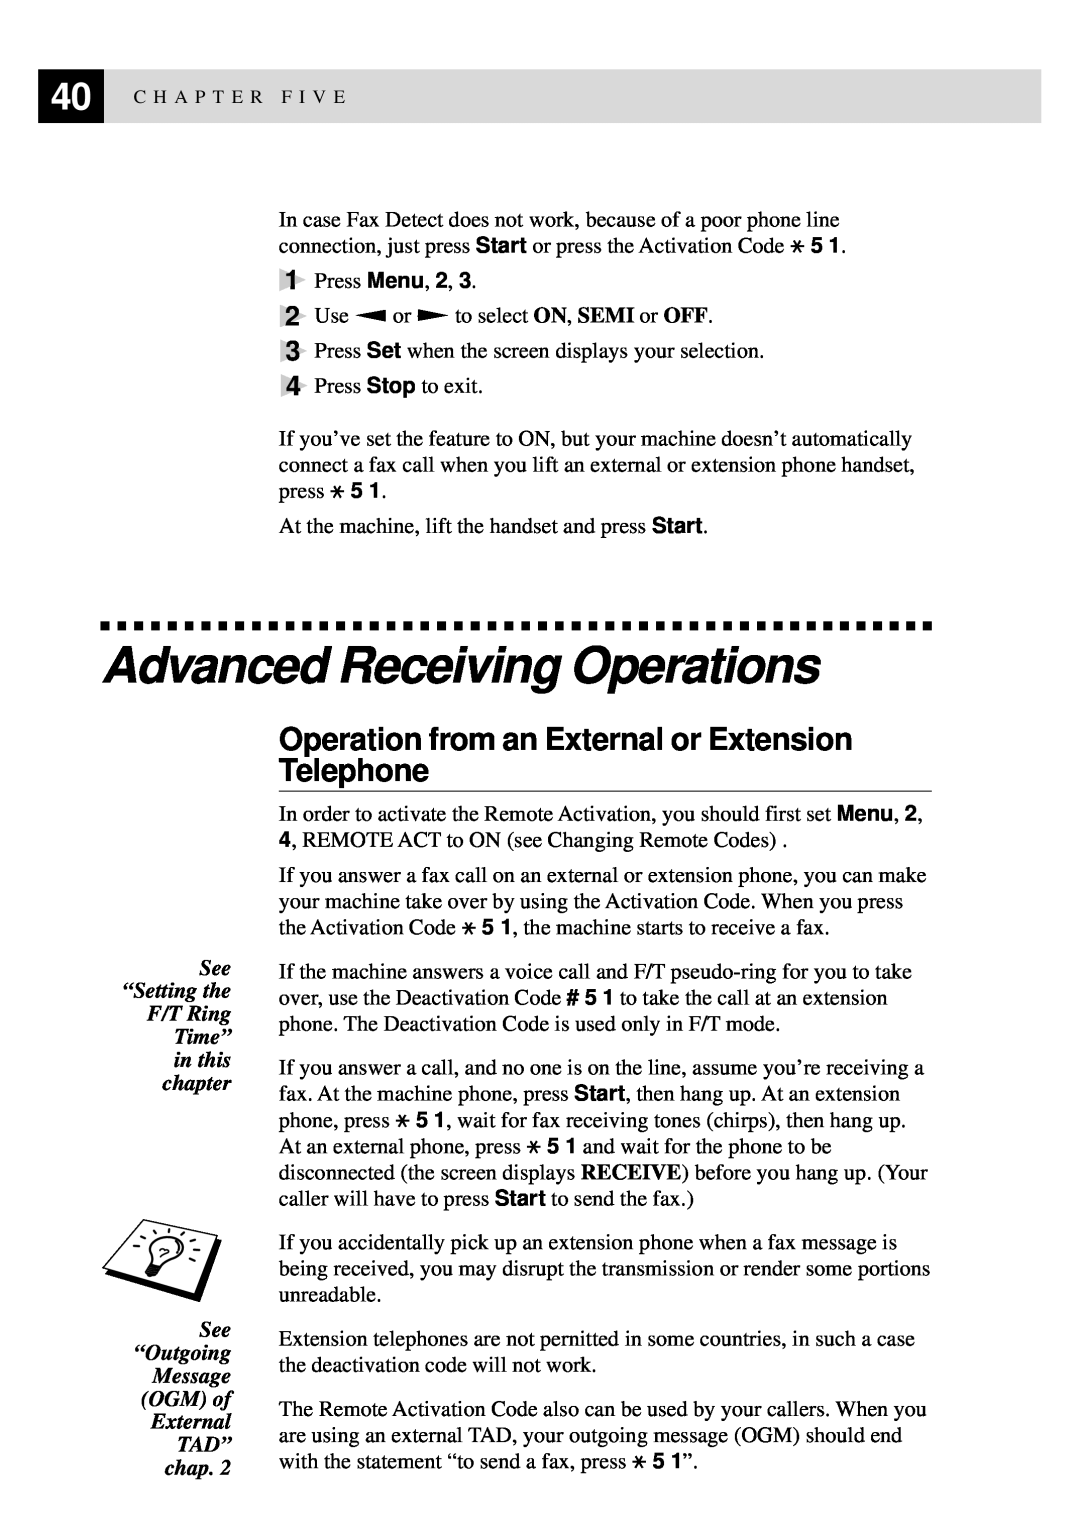 Brother 515 manual Advanced Receiving Operations, Operation from an External or Extension Telephone 